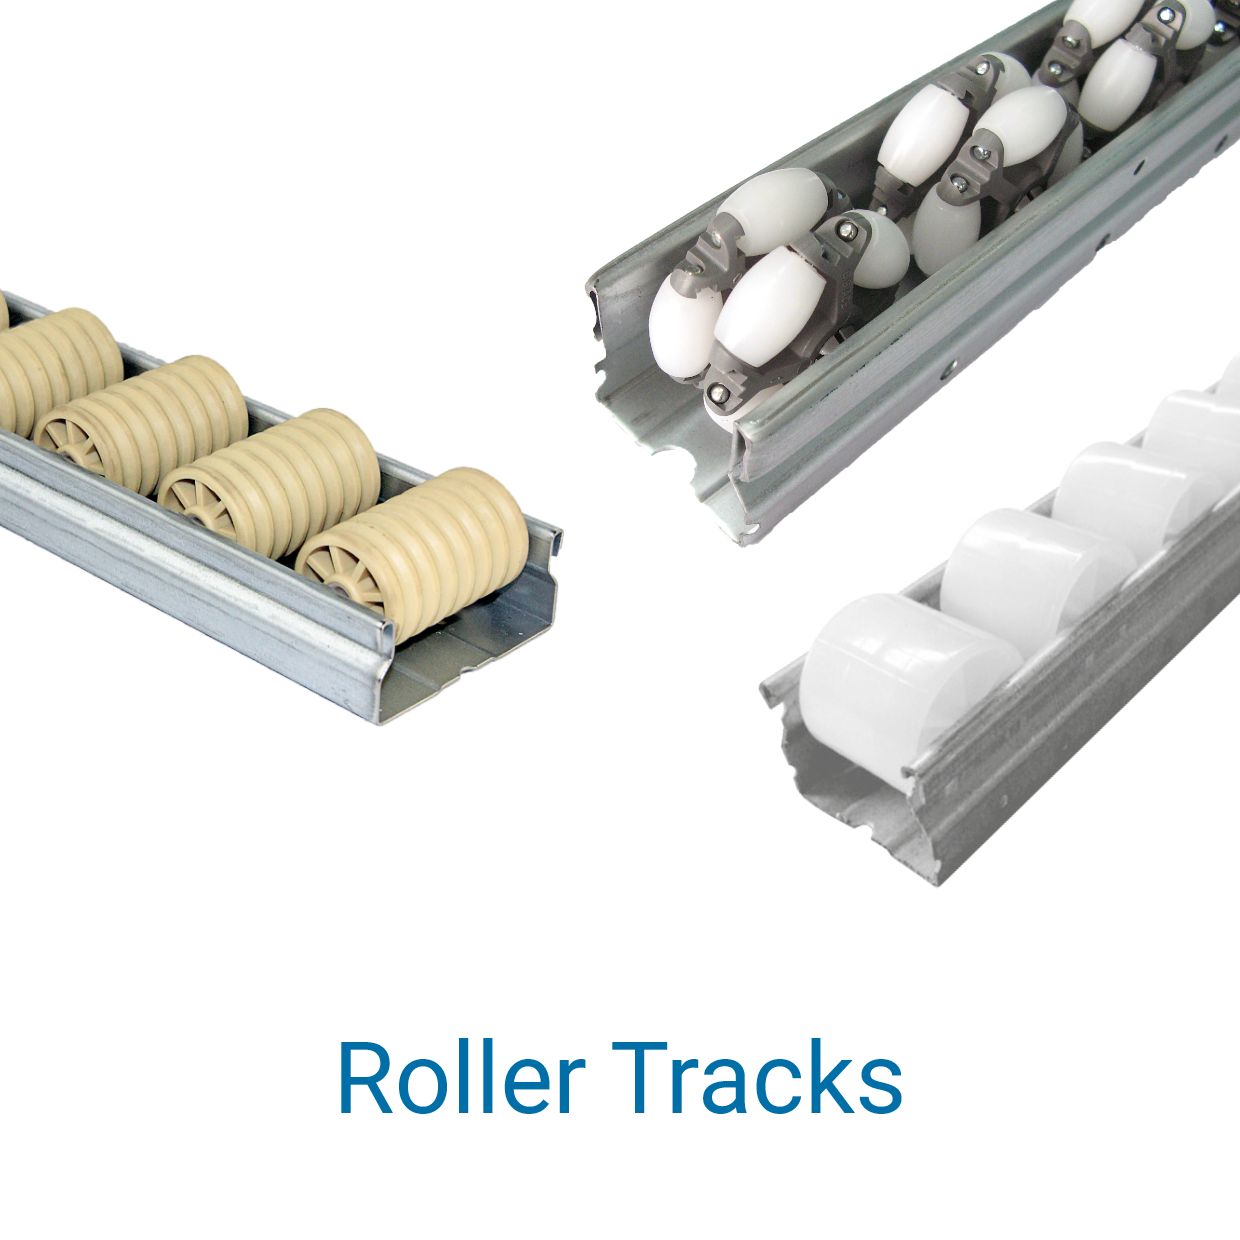 Different roller tracks from BeeWaTec